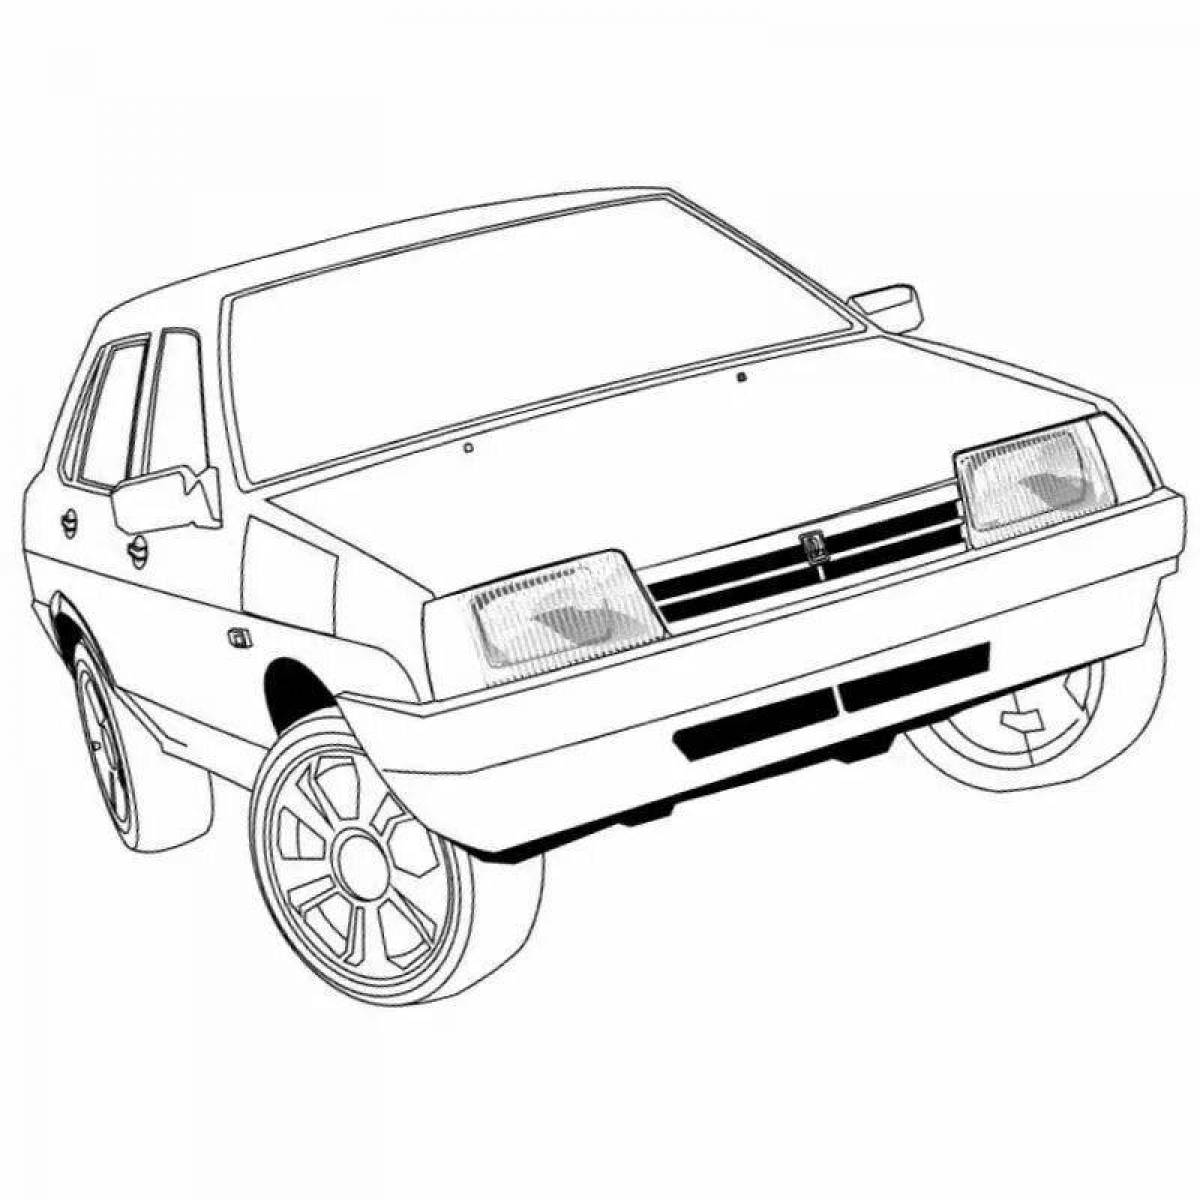 Alluring vaz 2108 coloring book